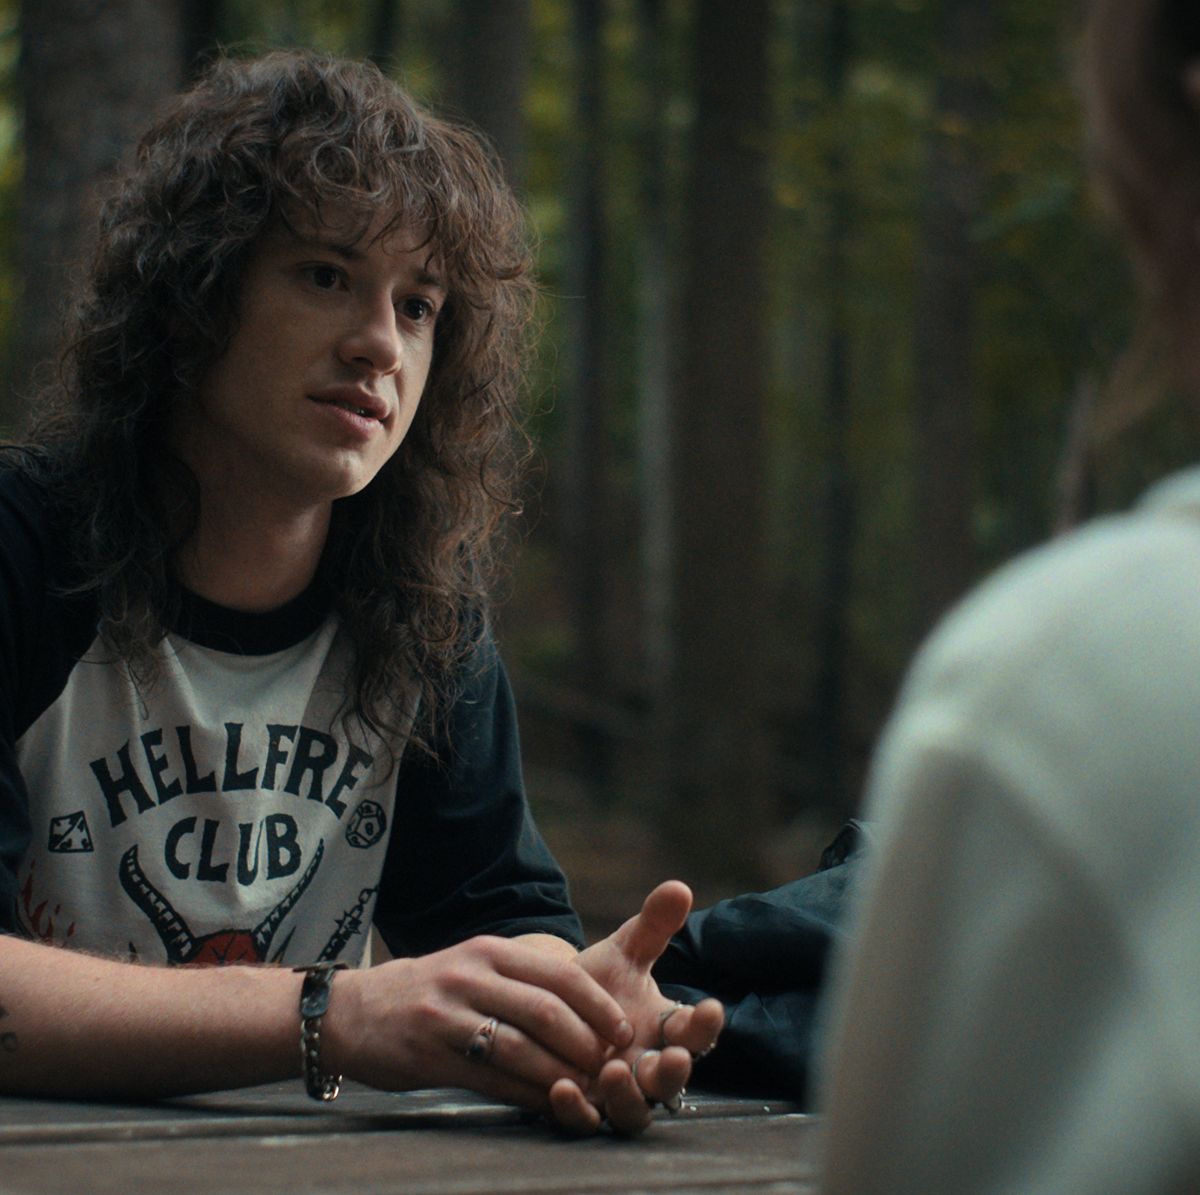 Joseph Quinn on a Possible Cameo in “Stranger Things” Season 5